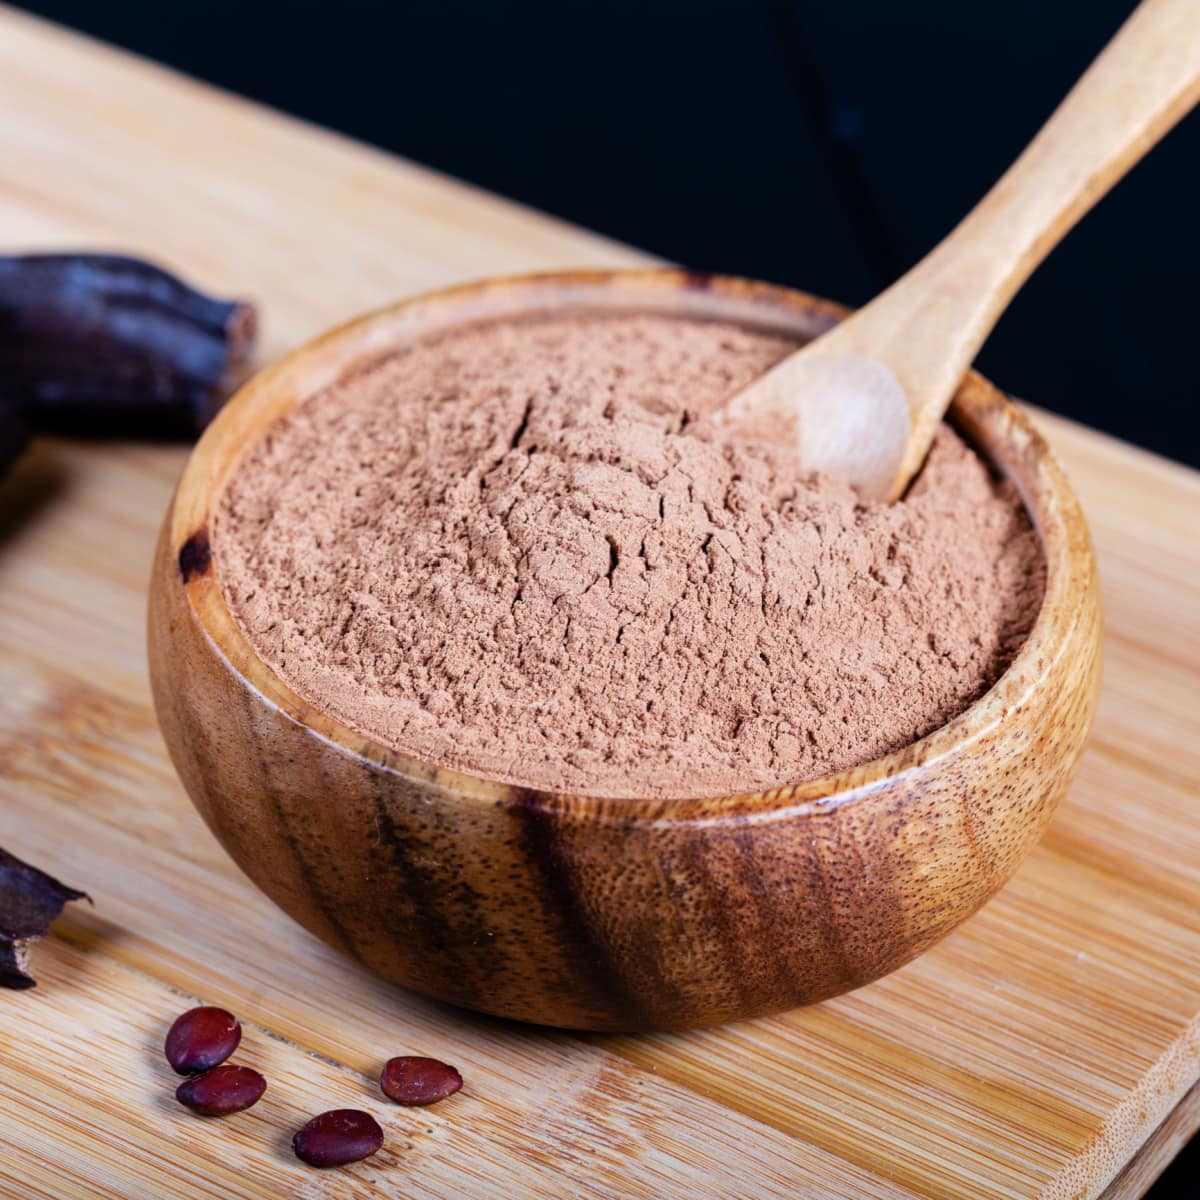 Bowl of Carob Powder and Carob Pods on a Wooden Table